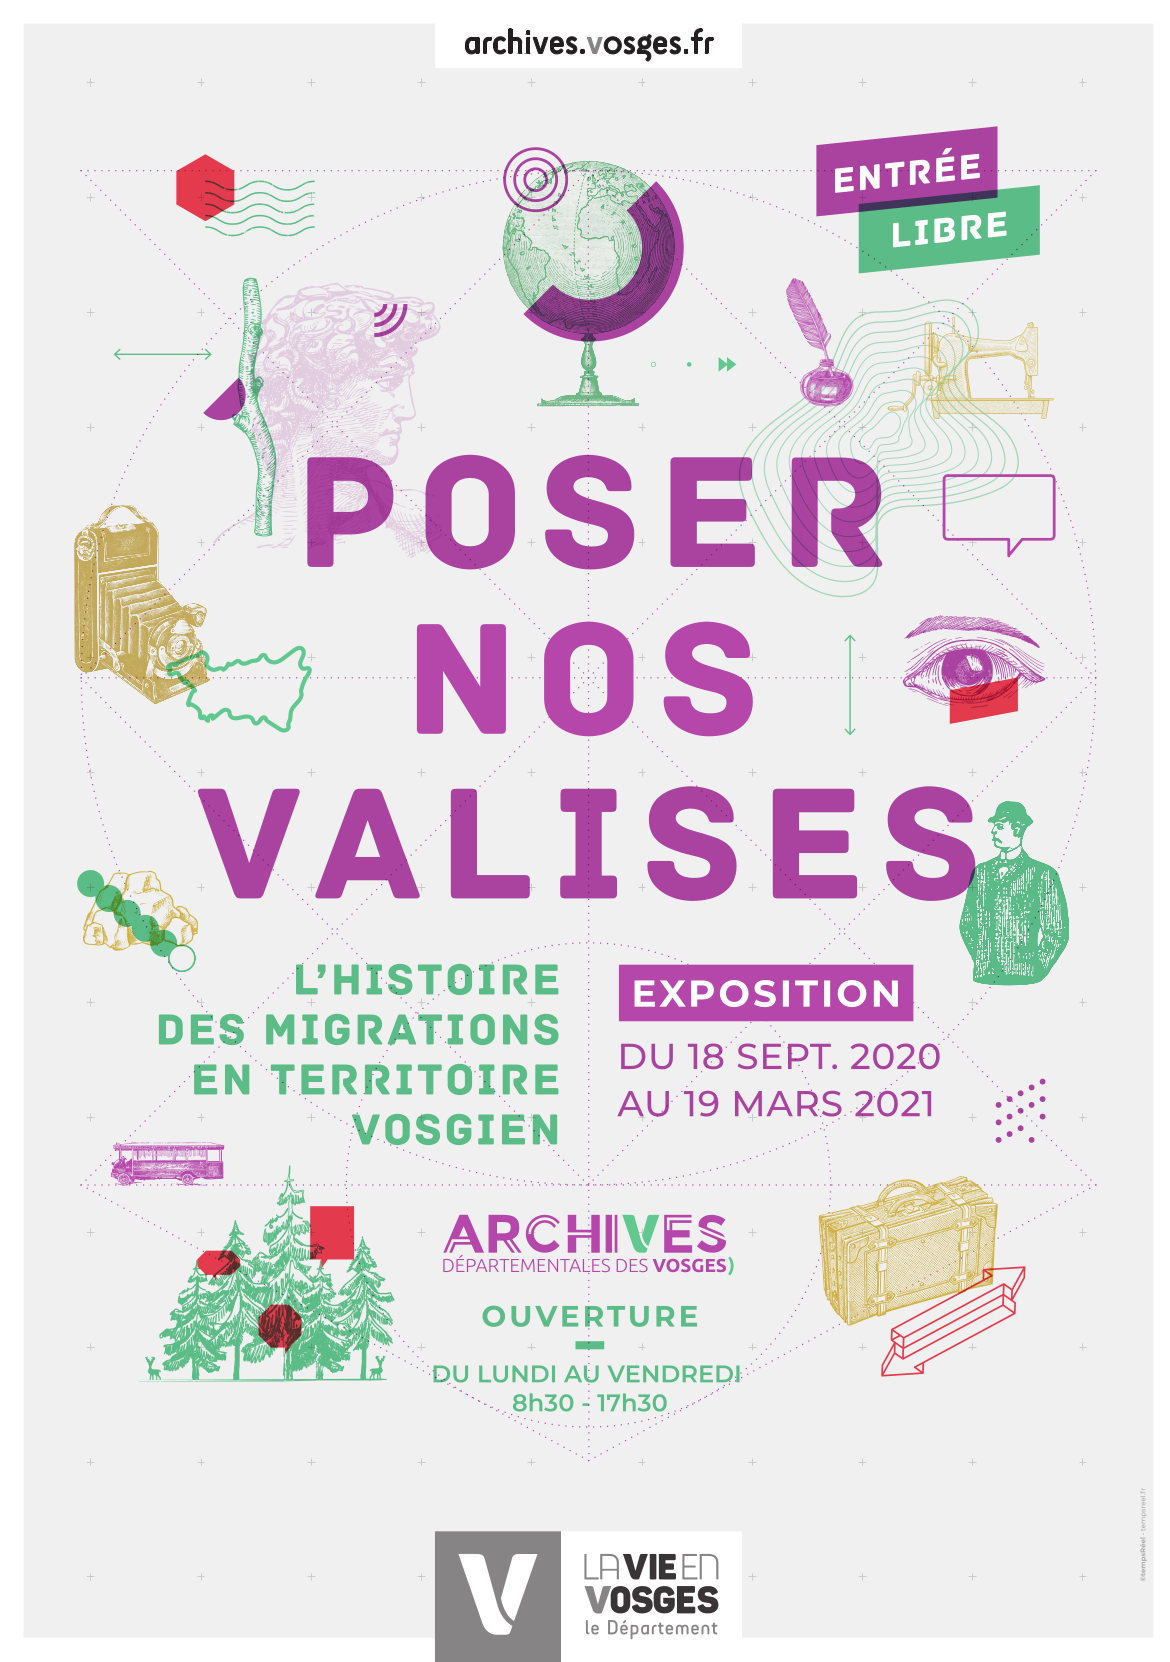 Exposition : Poser nos valises